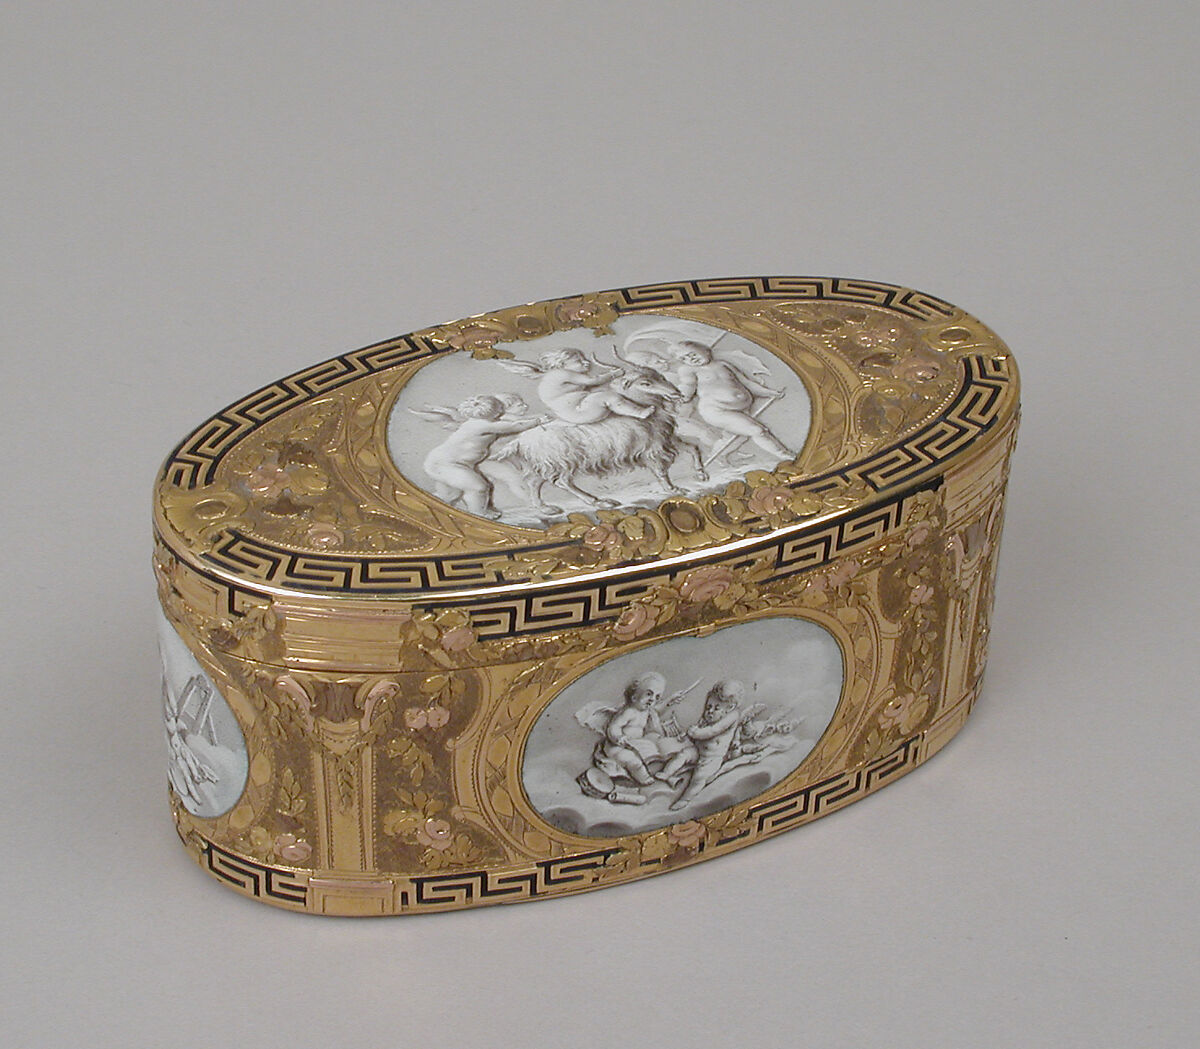 Snuffbox, Maker known by his initials A. P. C., Switzerland, Gold, enamel, Swiss 